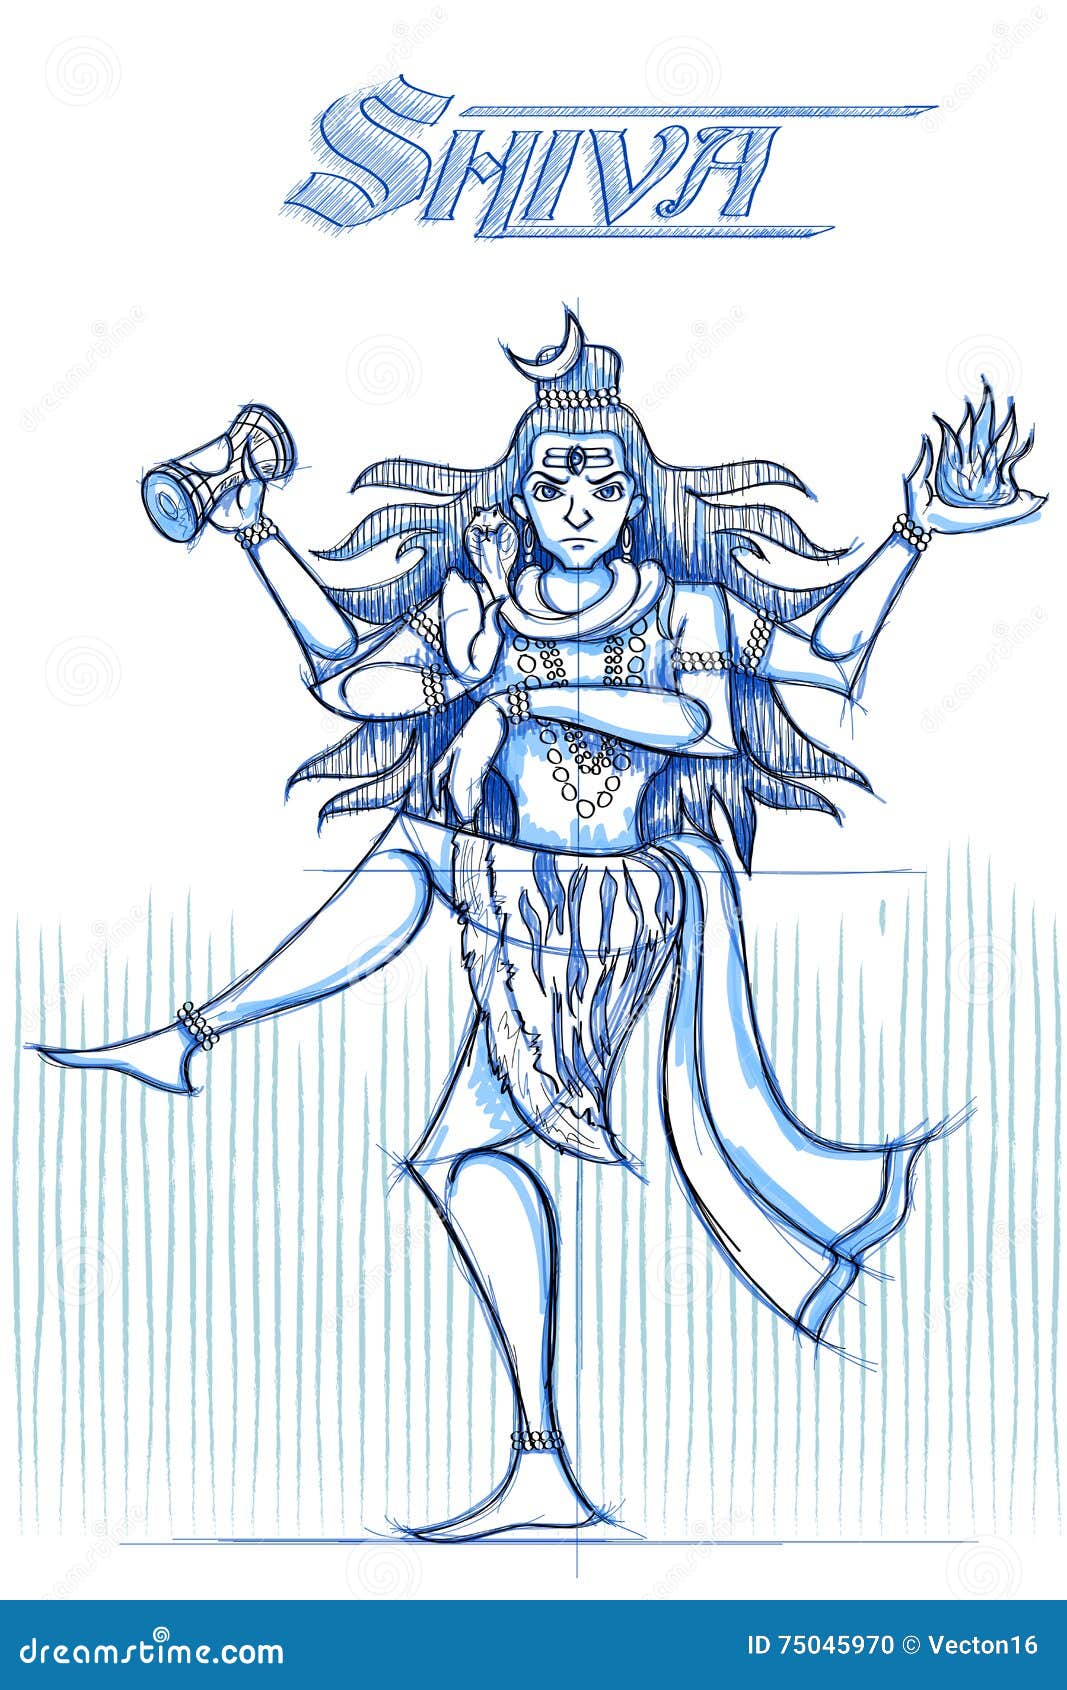 Indian God Shiva in Sketchy Look Stock Vector - Illustration of ...